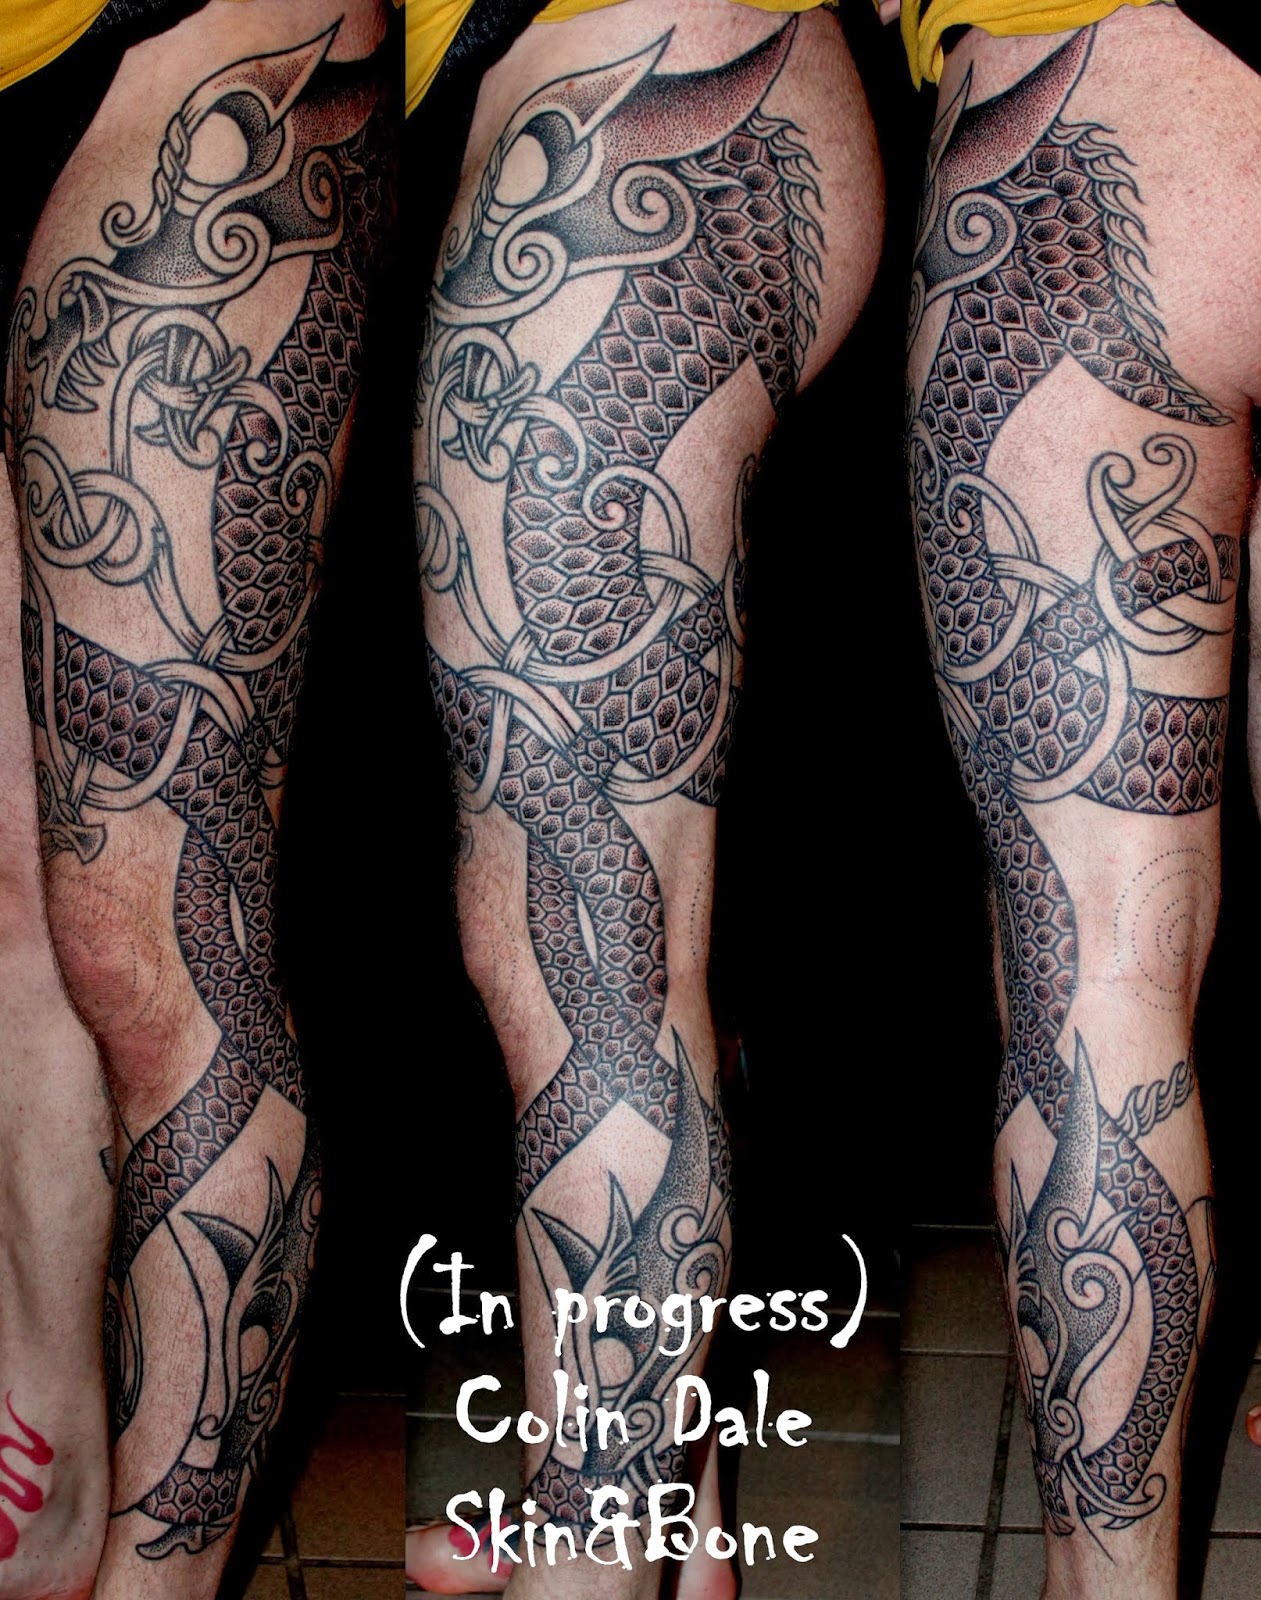 Black-And-White-Dragon-Tattoo-Designs by Zexphyra on DeviantArt